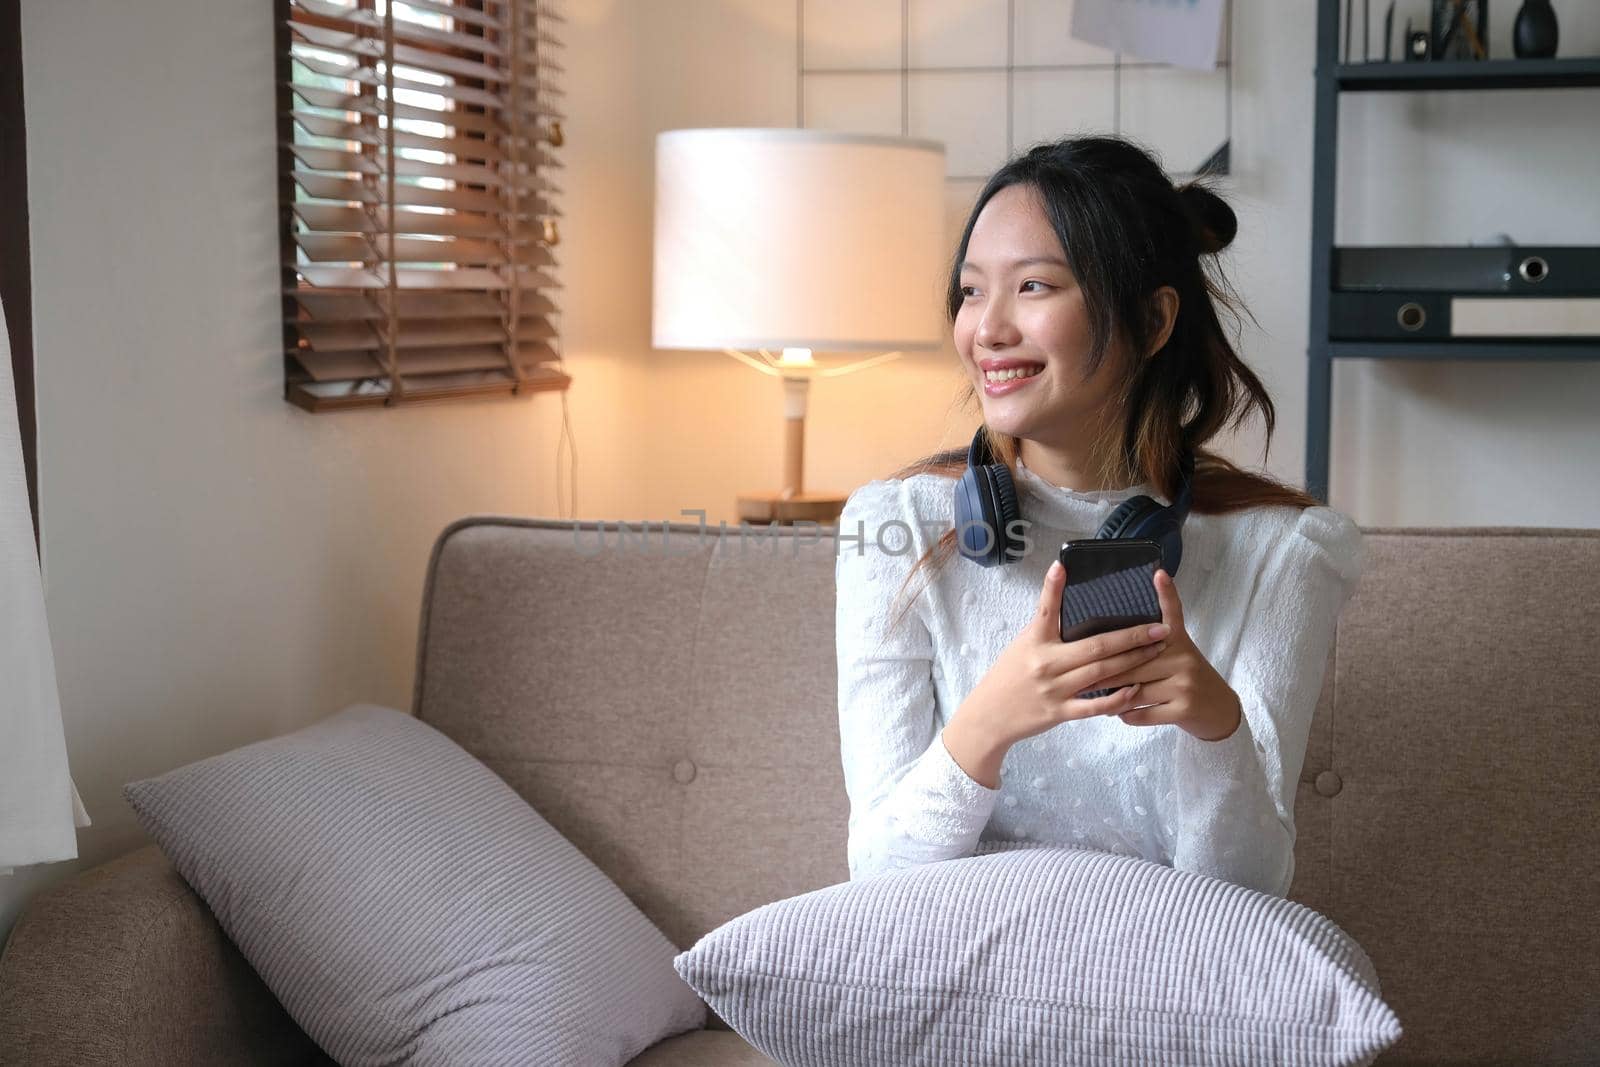 Happy and cheerful young Asian female choosing her music playlist on mobile phone, listening to music through her headphones while relaxing in the living room..